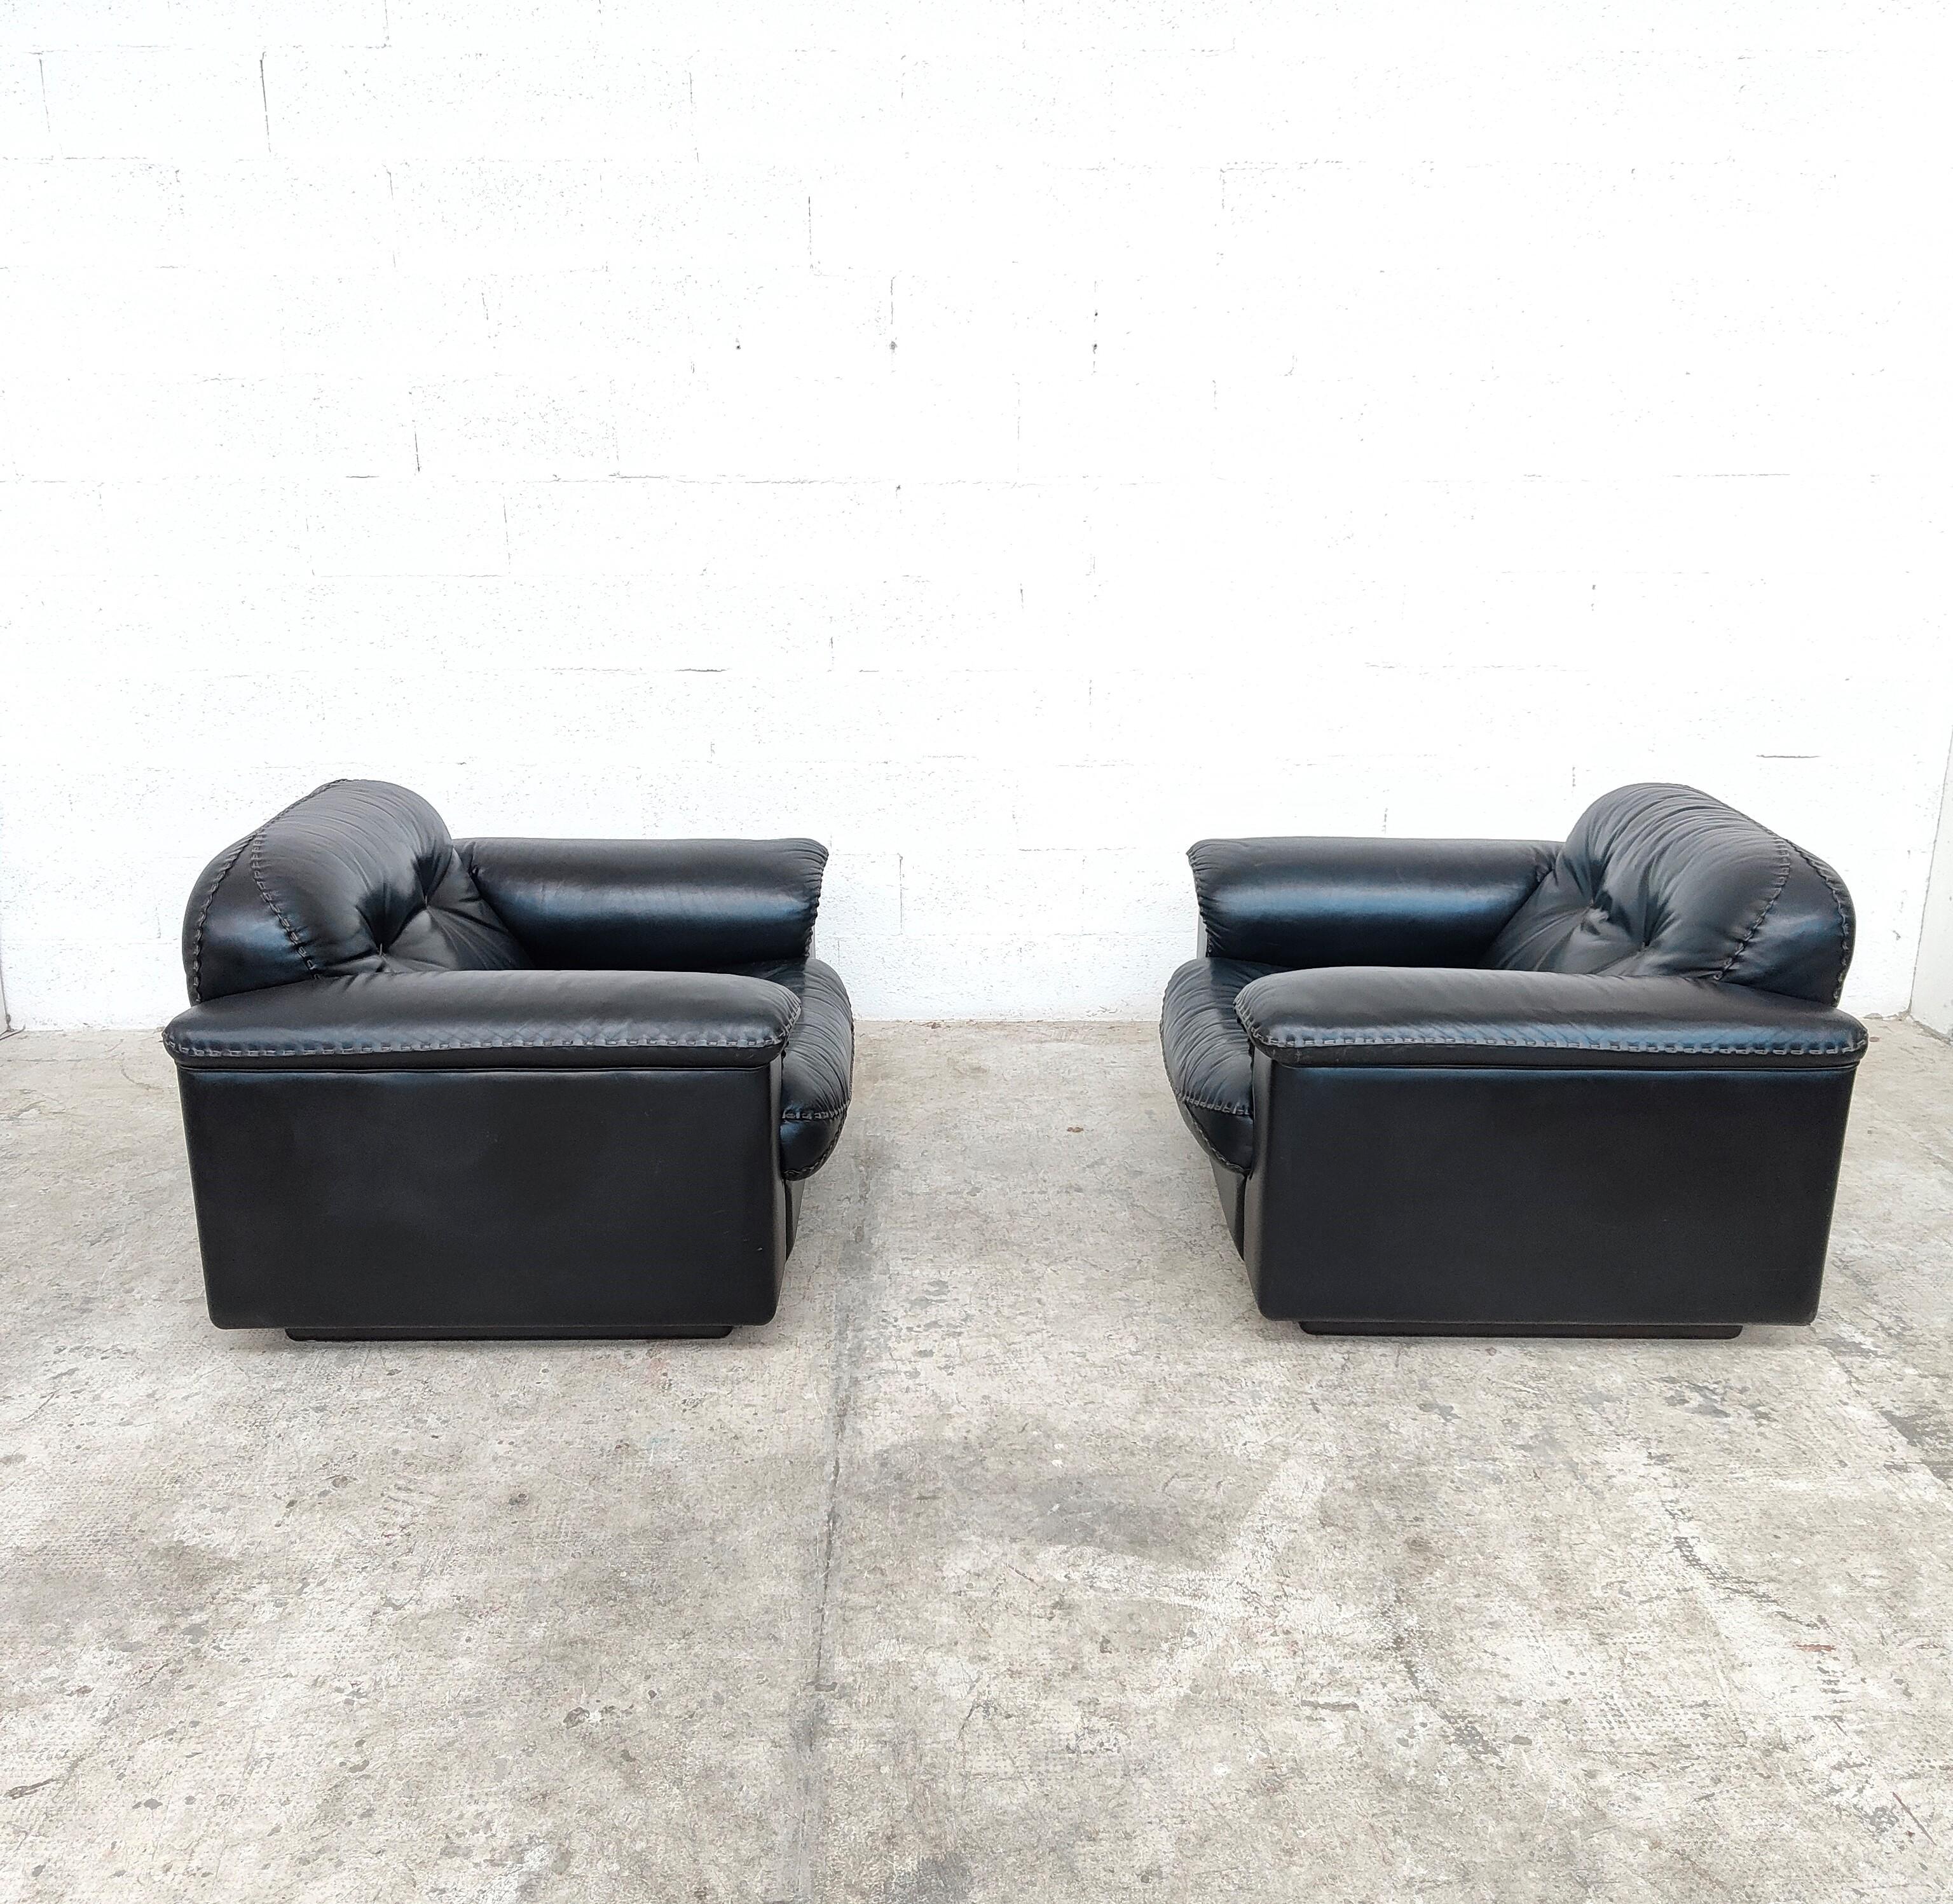 A pair of De Sede leather lounge chairs upholstered in dark black leather, c.1970s. These Swiss made chairs feature a reclining mechanism that allows the seats to extend forward while the back rests recline for maximum comfort. The hand stitched